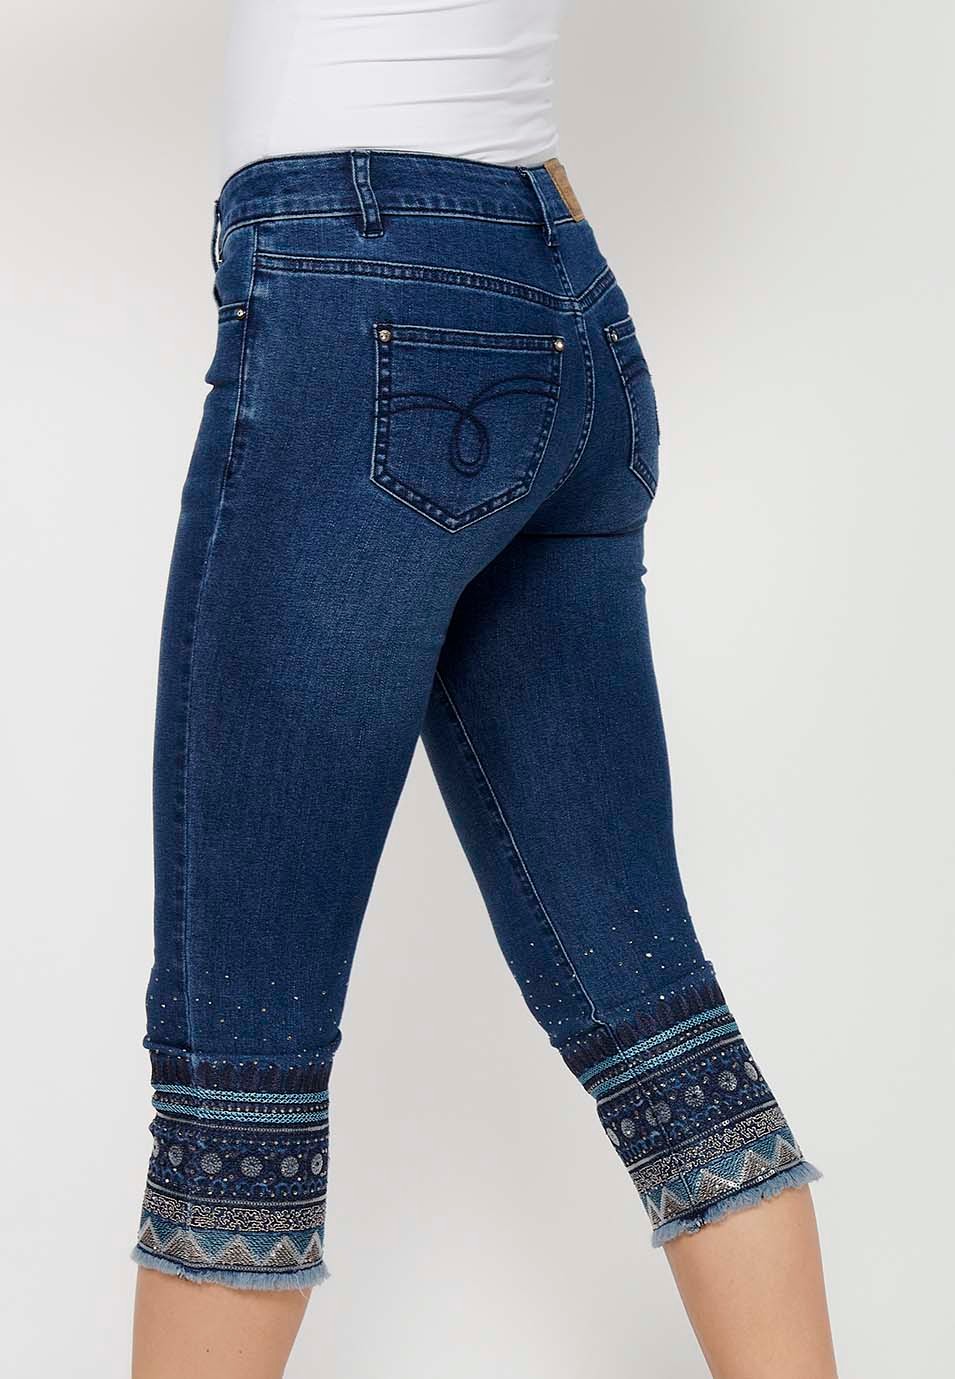 Pirate denim pants with embroidery finish and front zipper closure in Blue for Women 8